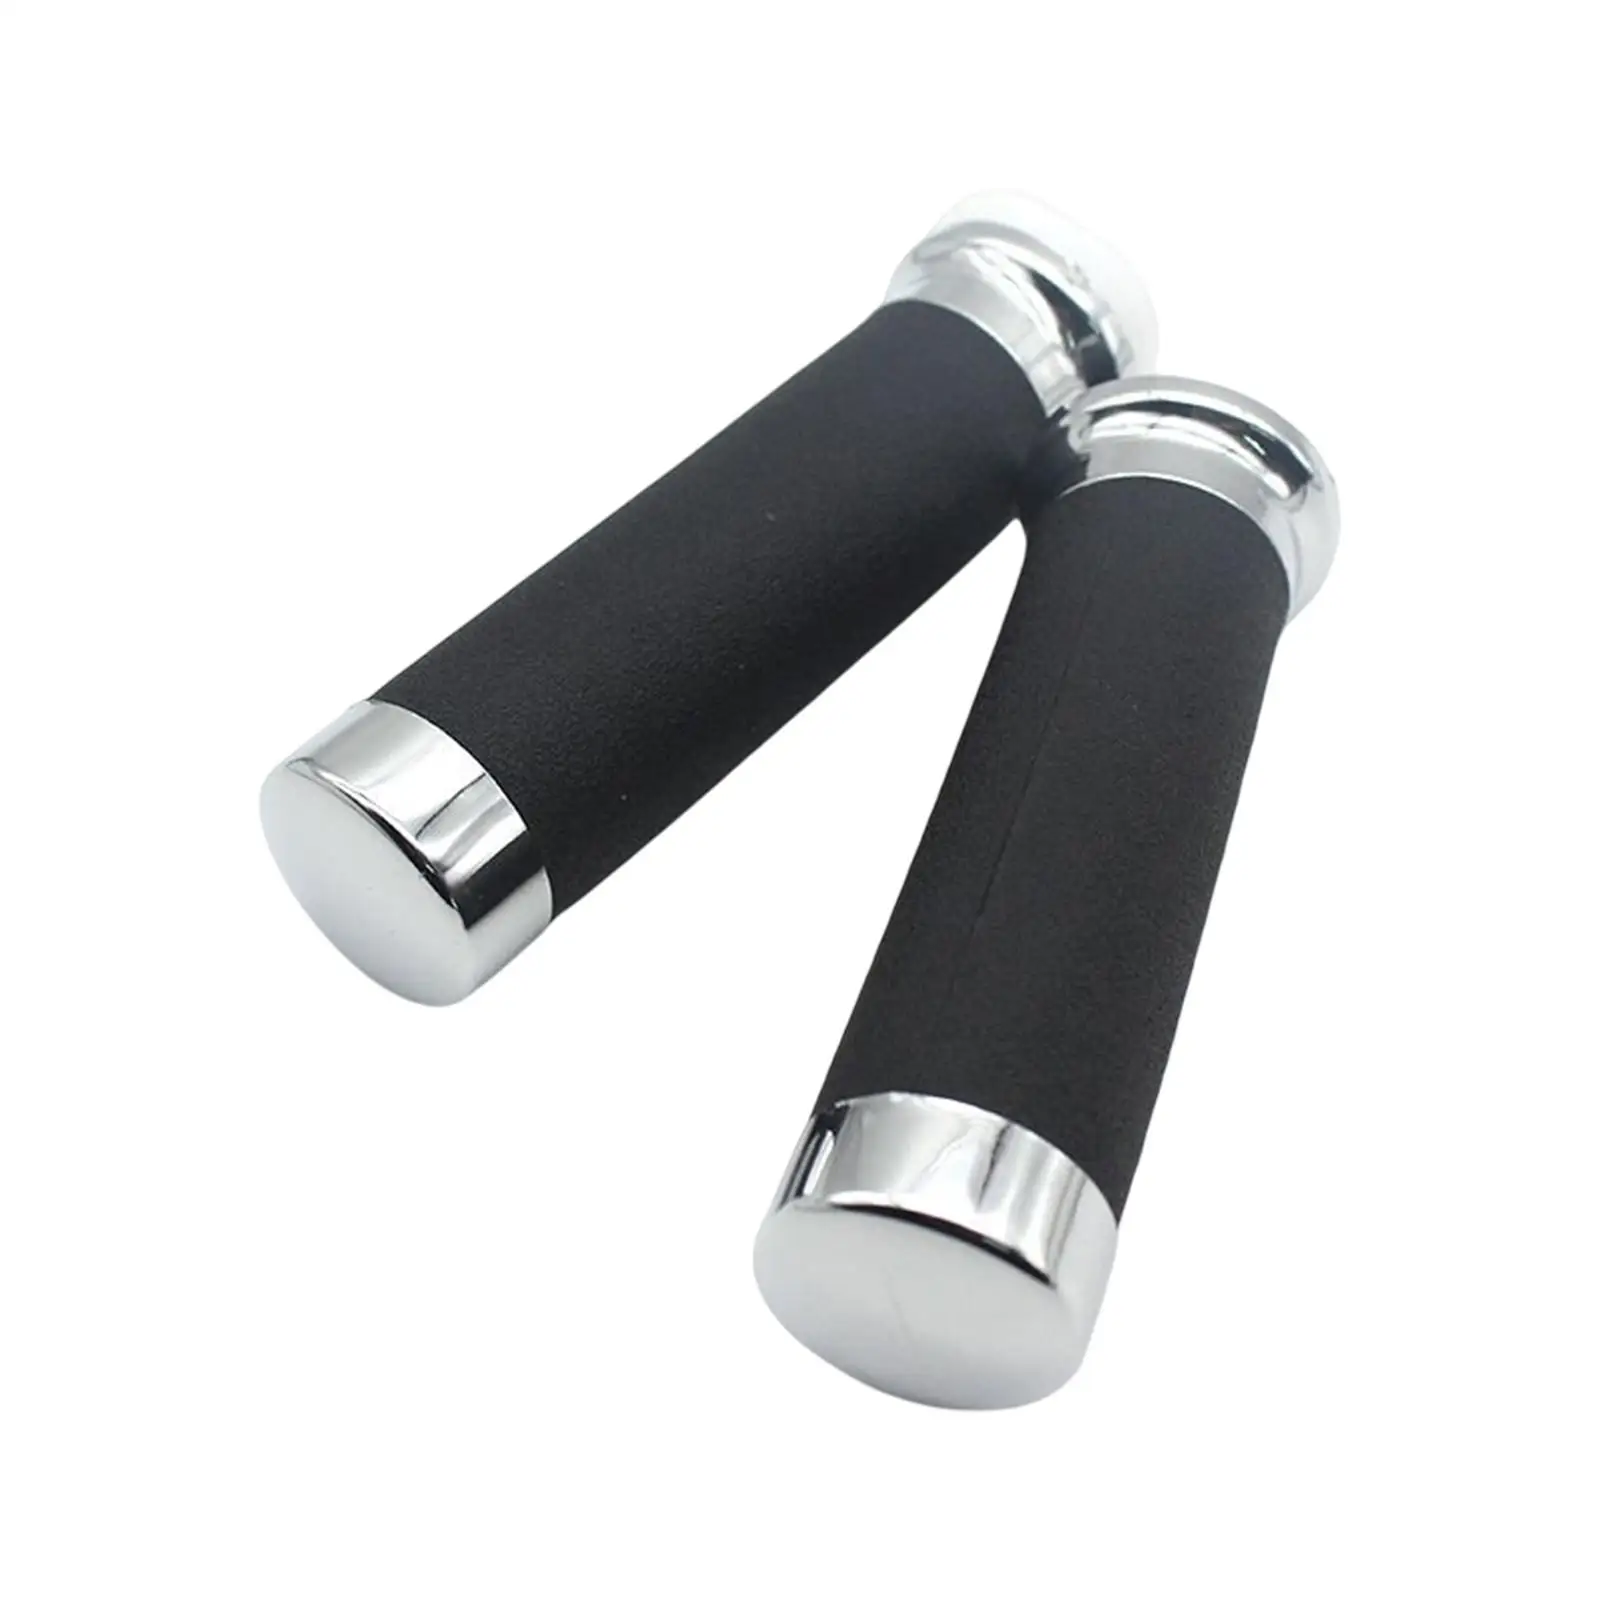 2 Pieces Motorcycle Handlebar Grips for Honda Magna 250 Accessories